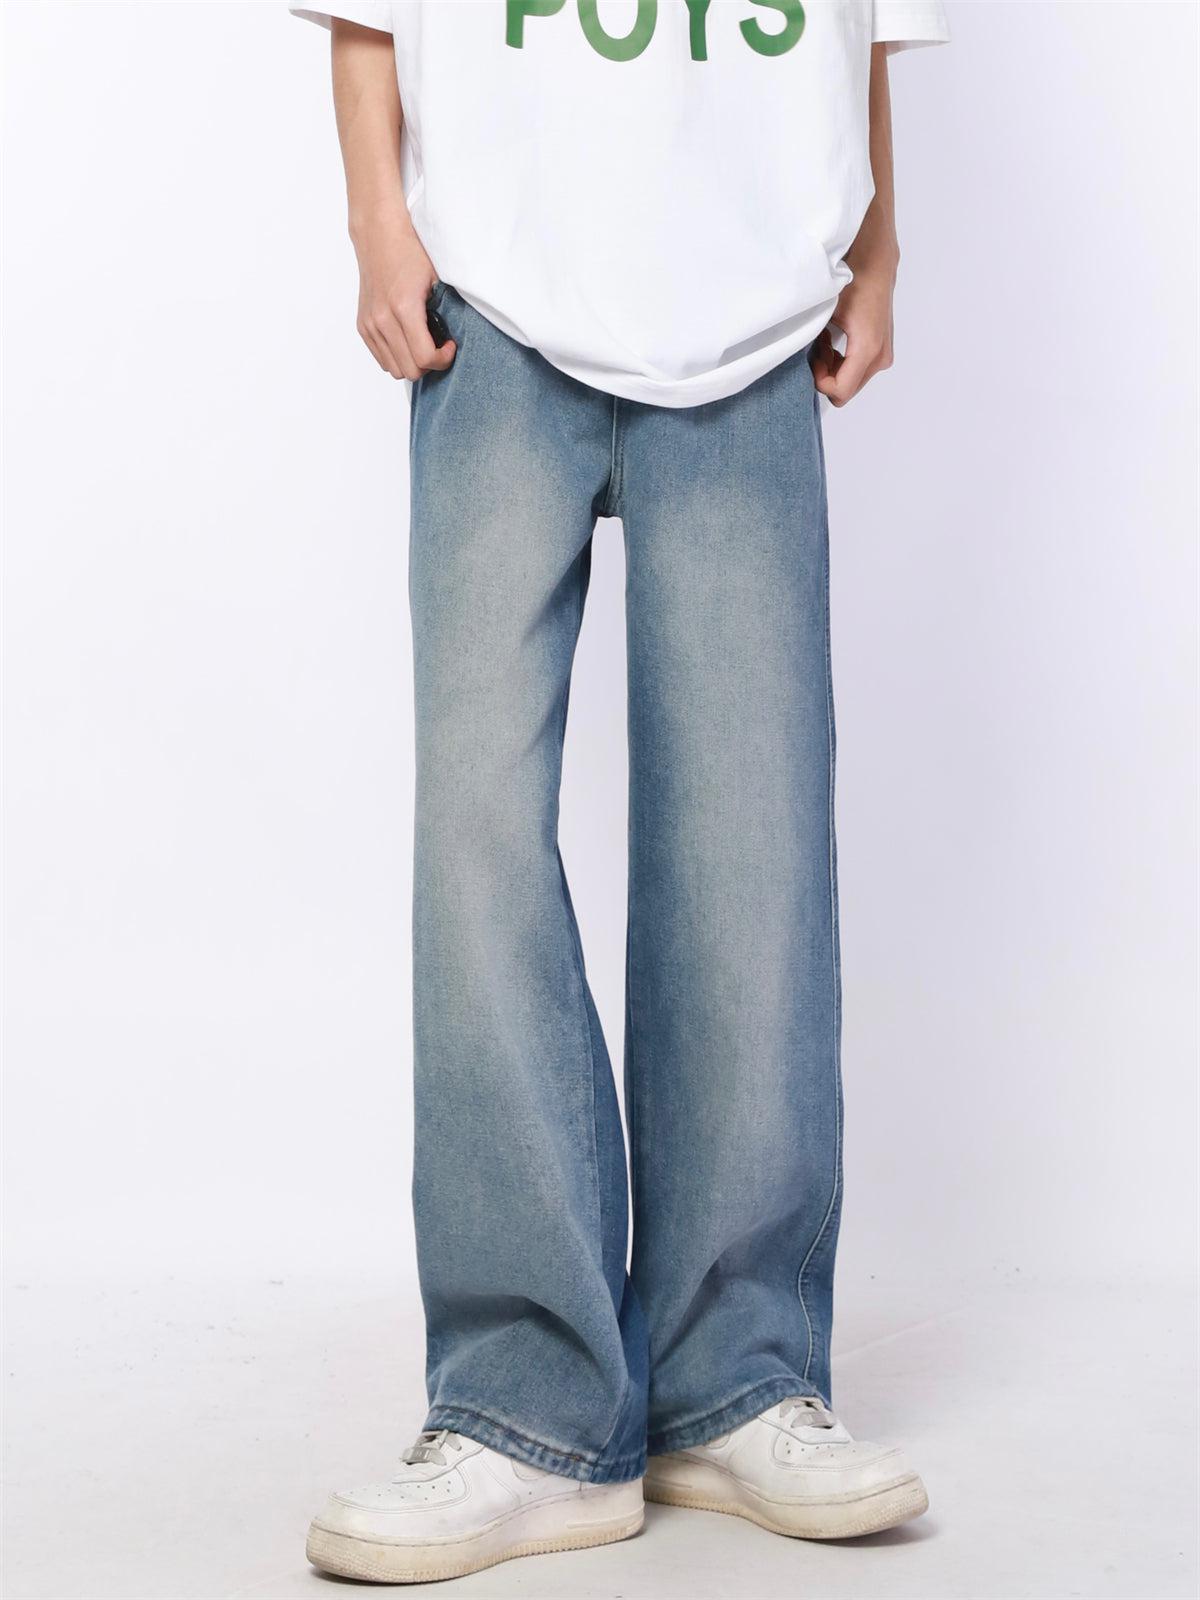 Gradient Washed Straight Jeans Korean Street Fashion Jeans By Made Extreme Shop Online at OH Vault